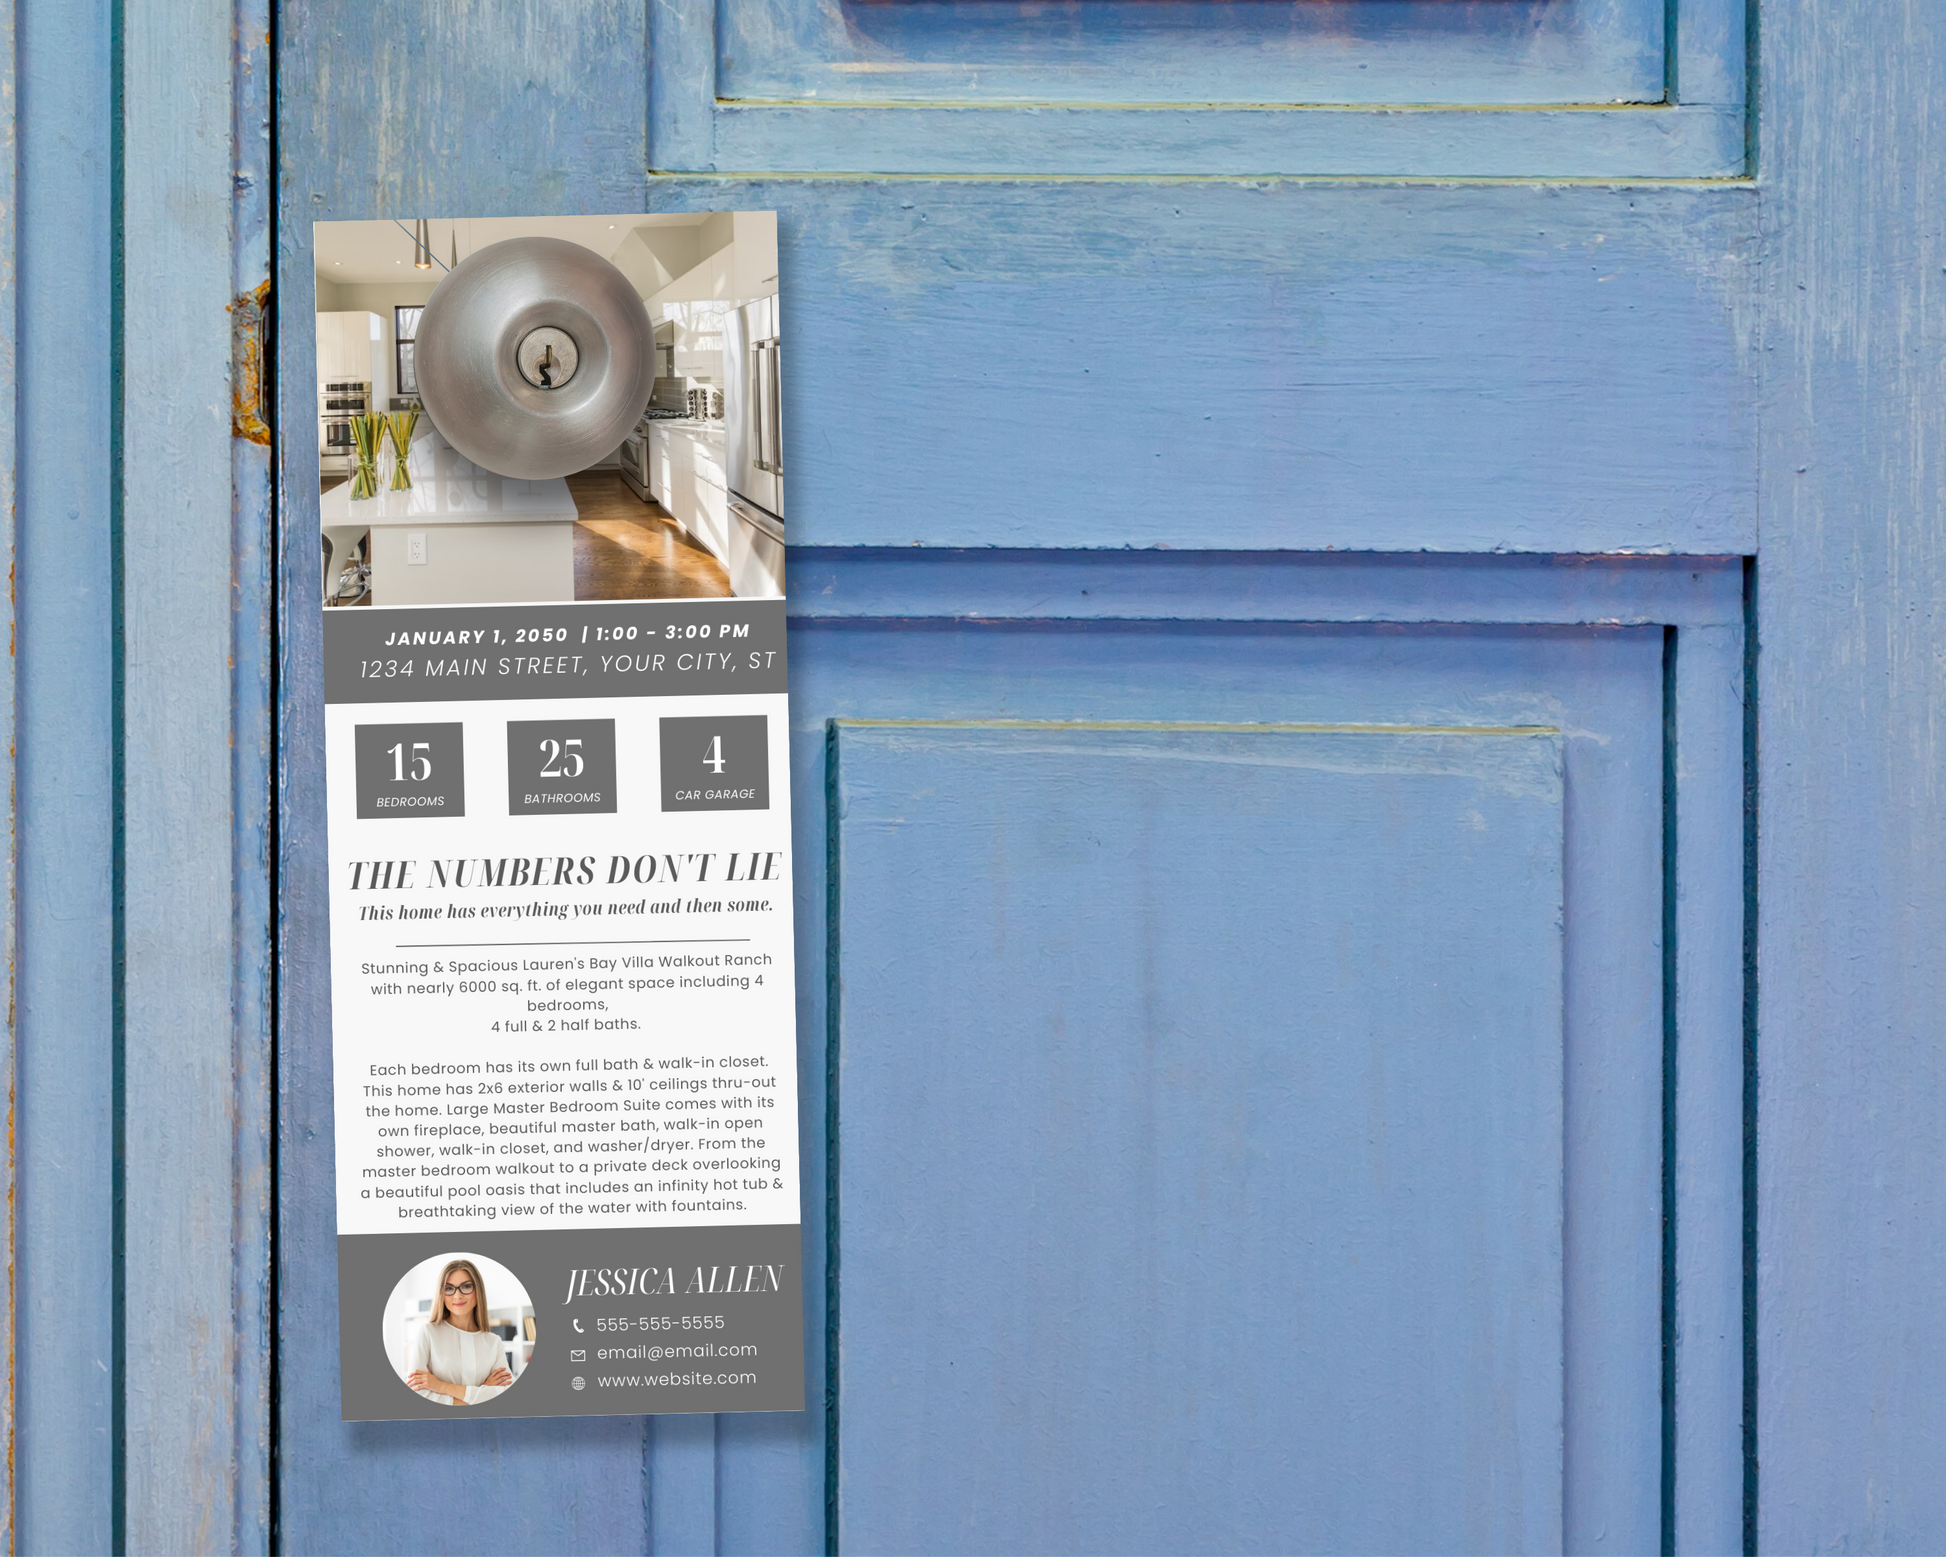 Real Estate Open House Door Hanger Template, Real Estate Property Listing Flyer, Open House Invitation, Realtor Door Sign, Open House Door Hanger Template